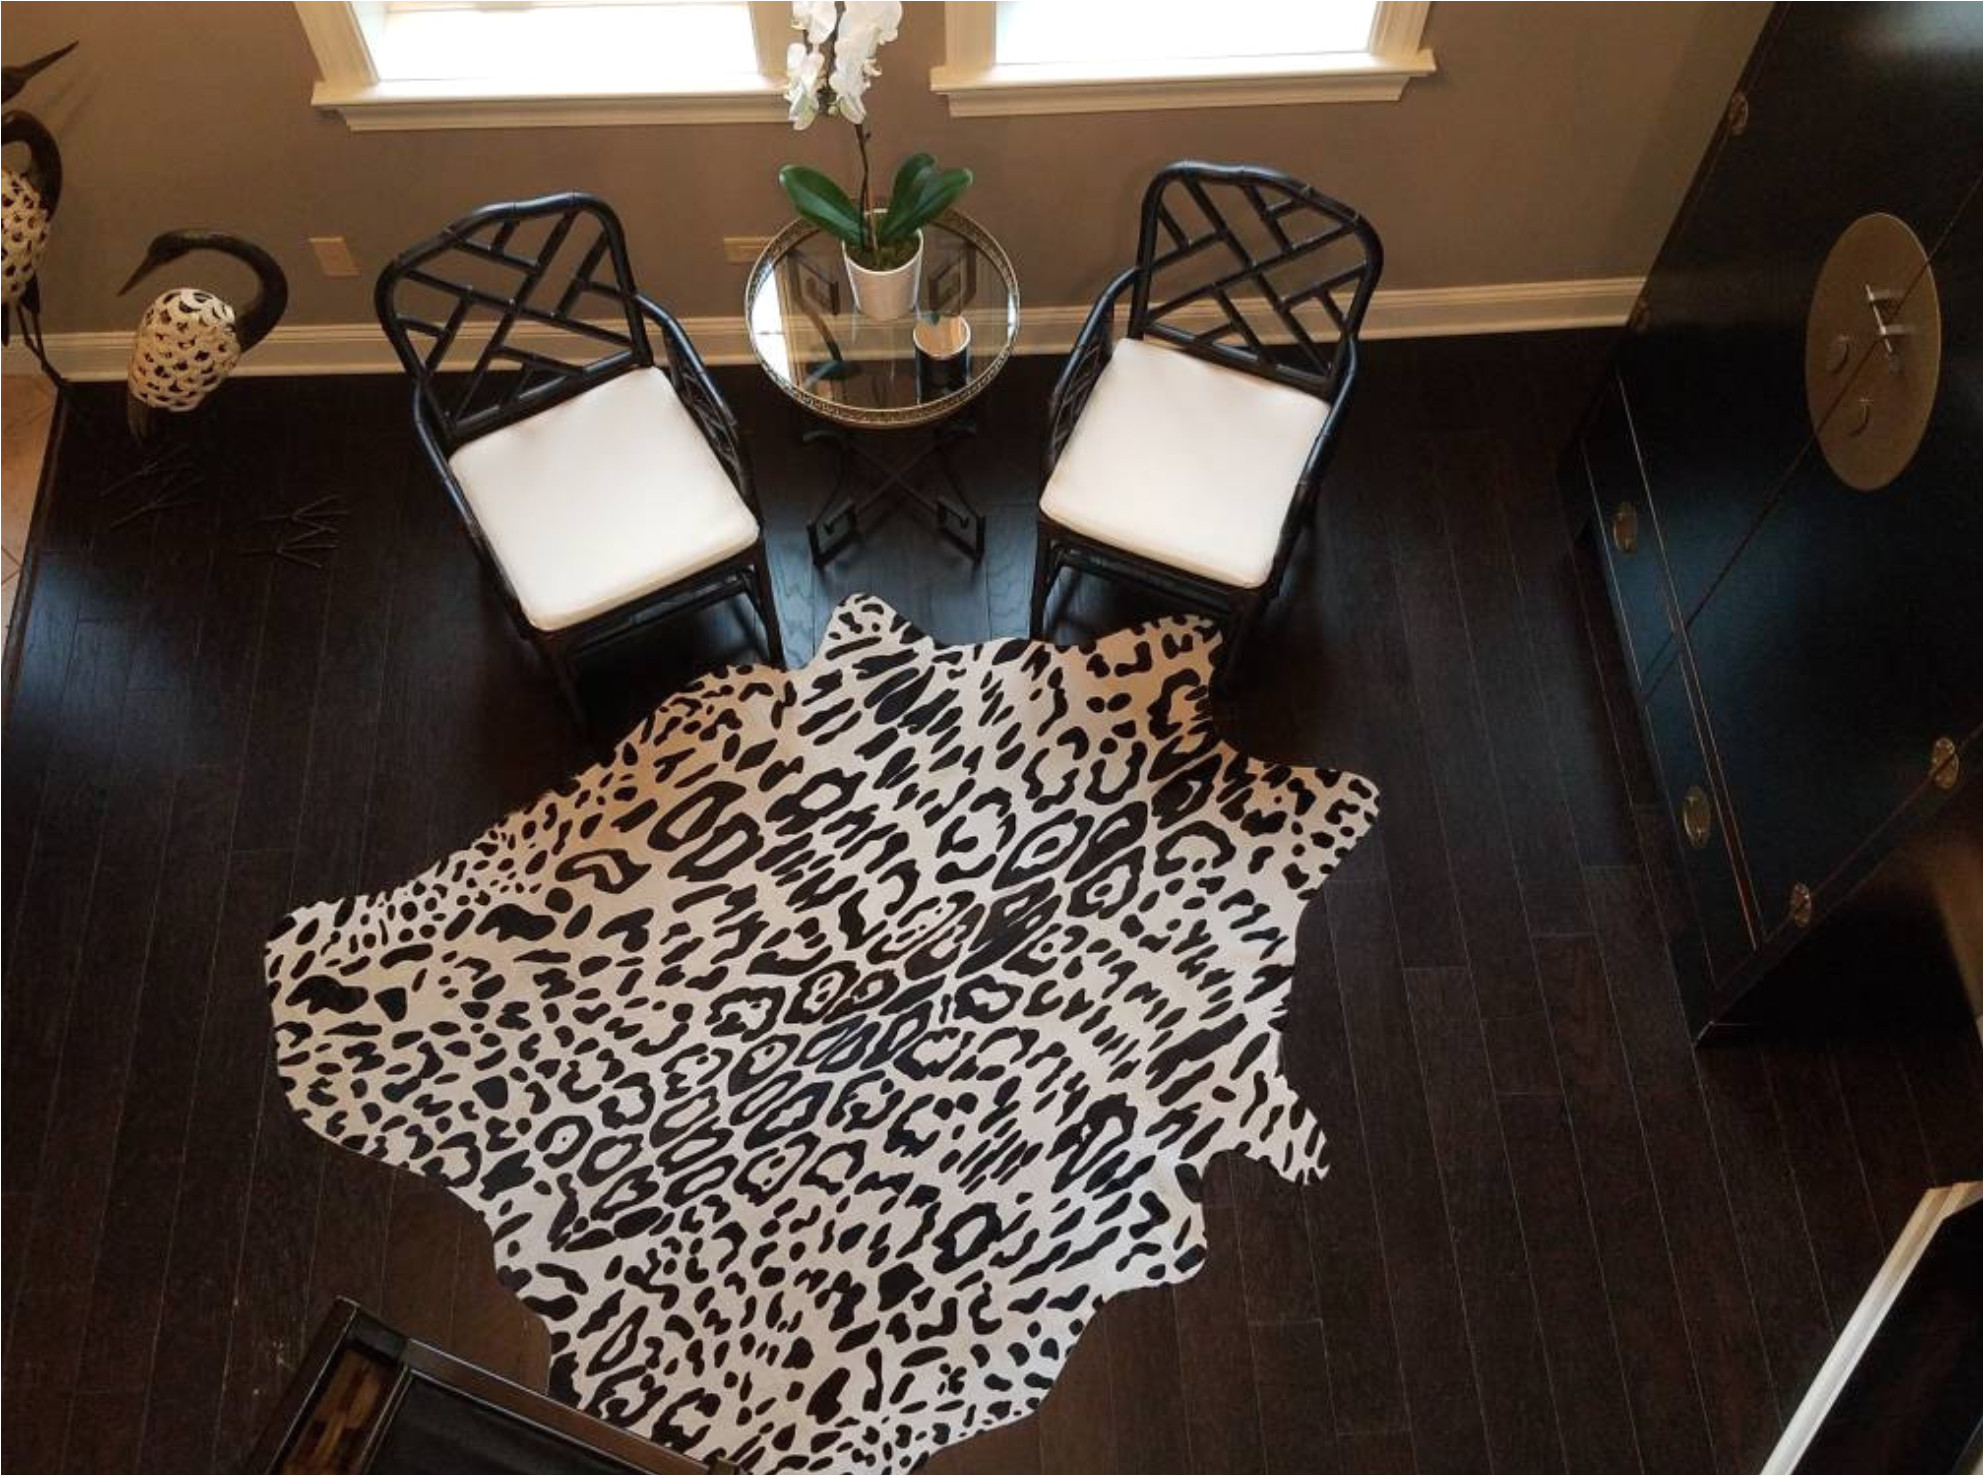 Where to Buy Cowhide Rugs Near Me | AdinaPorter